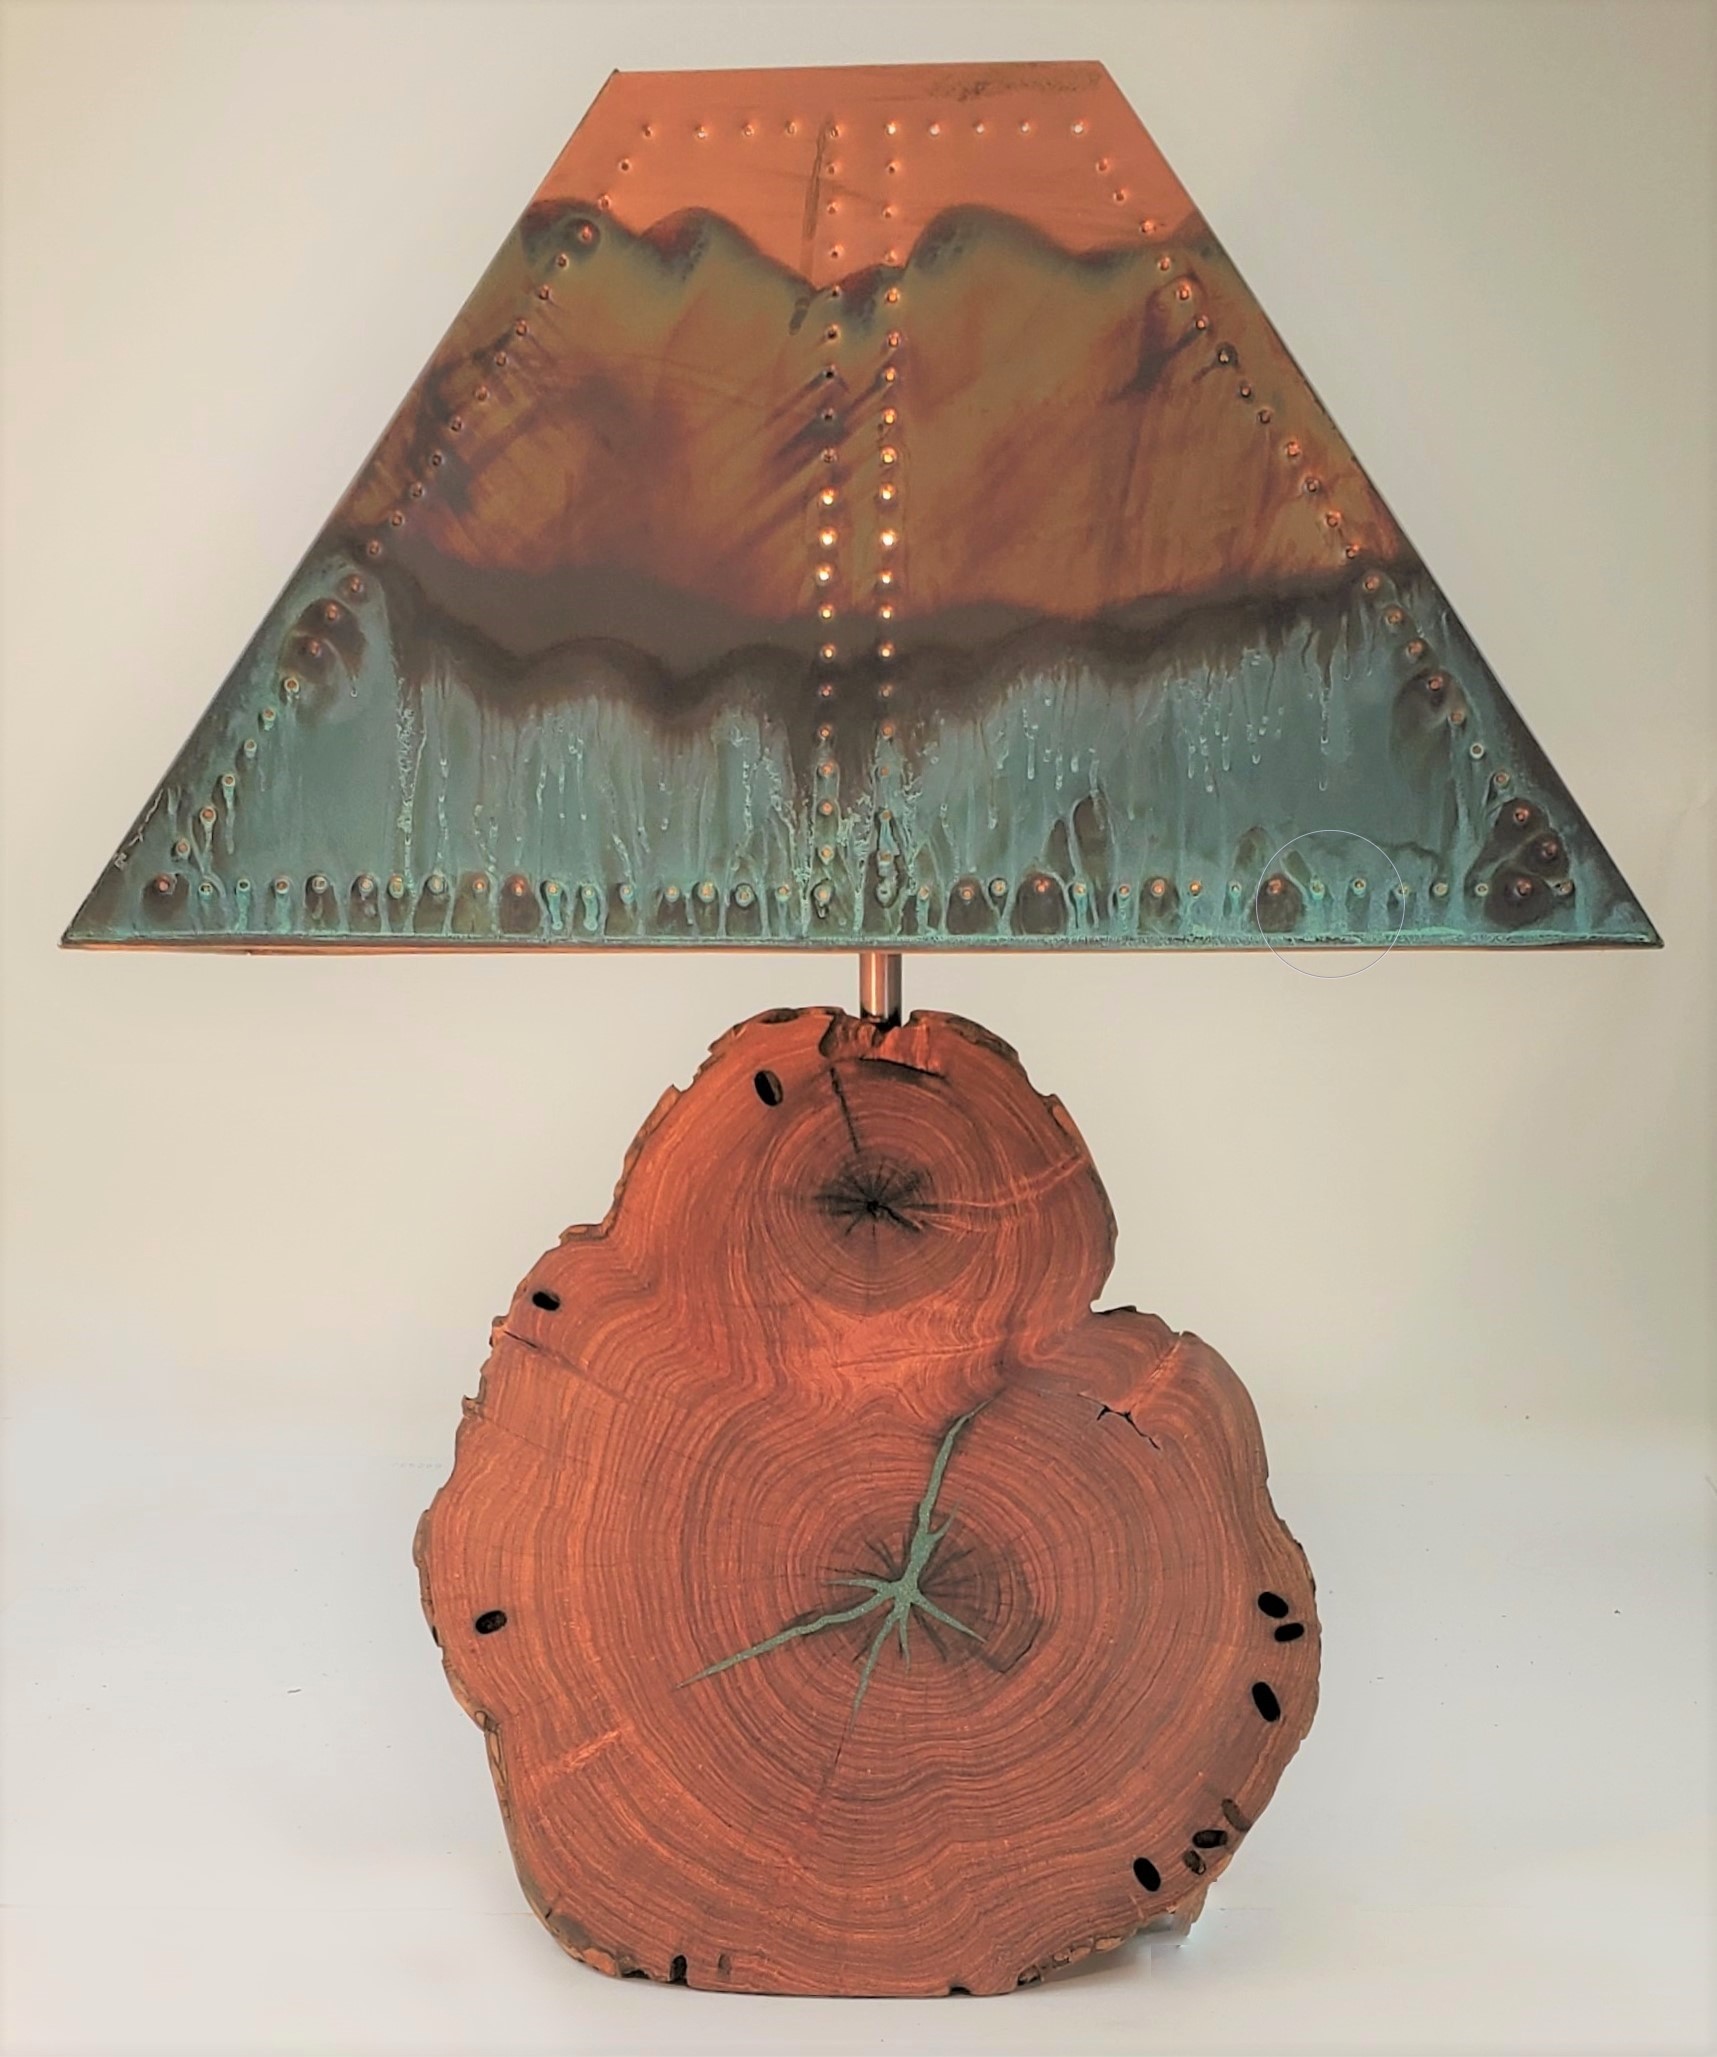 Mesquite Lamp with Turquoise Inlay and Copper Shade (Height: 26.5") #1021